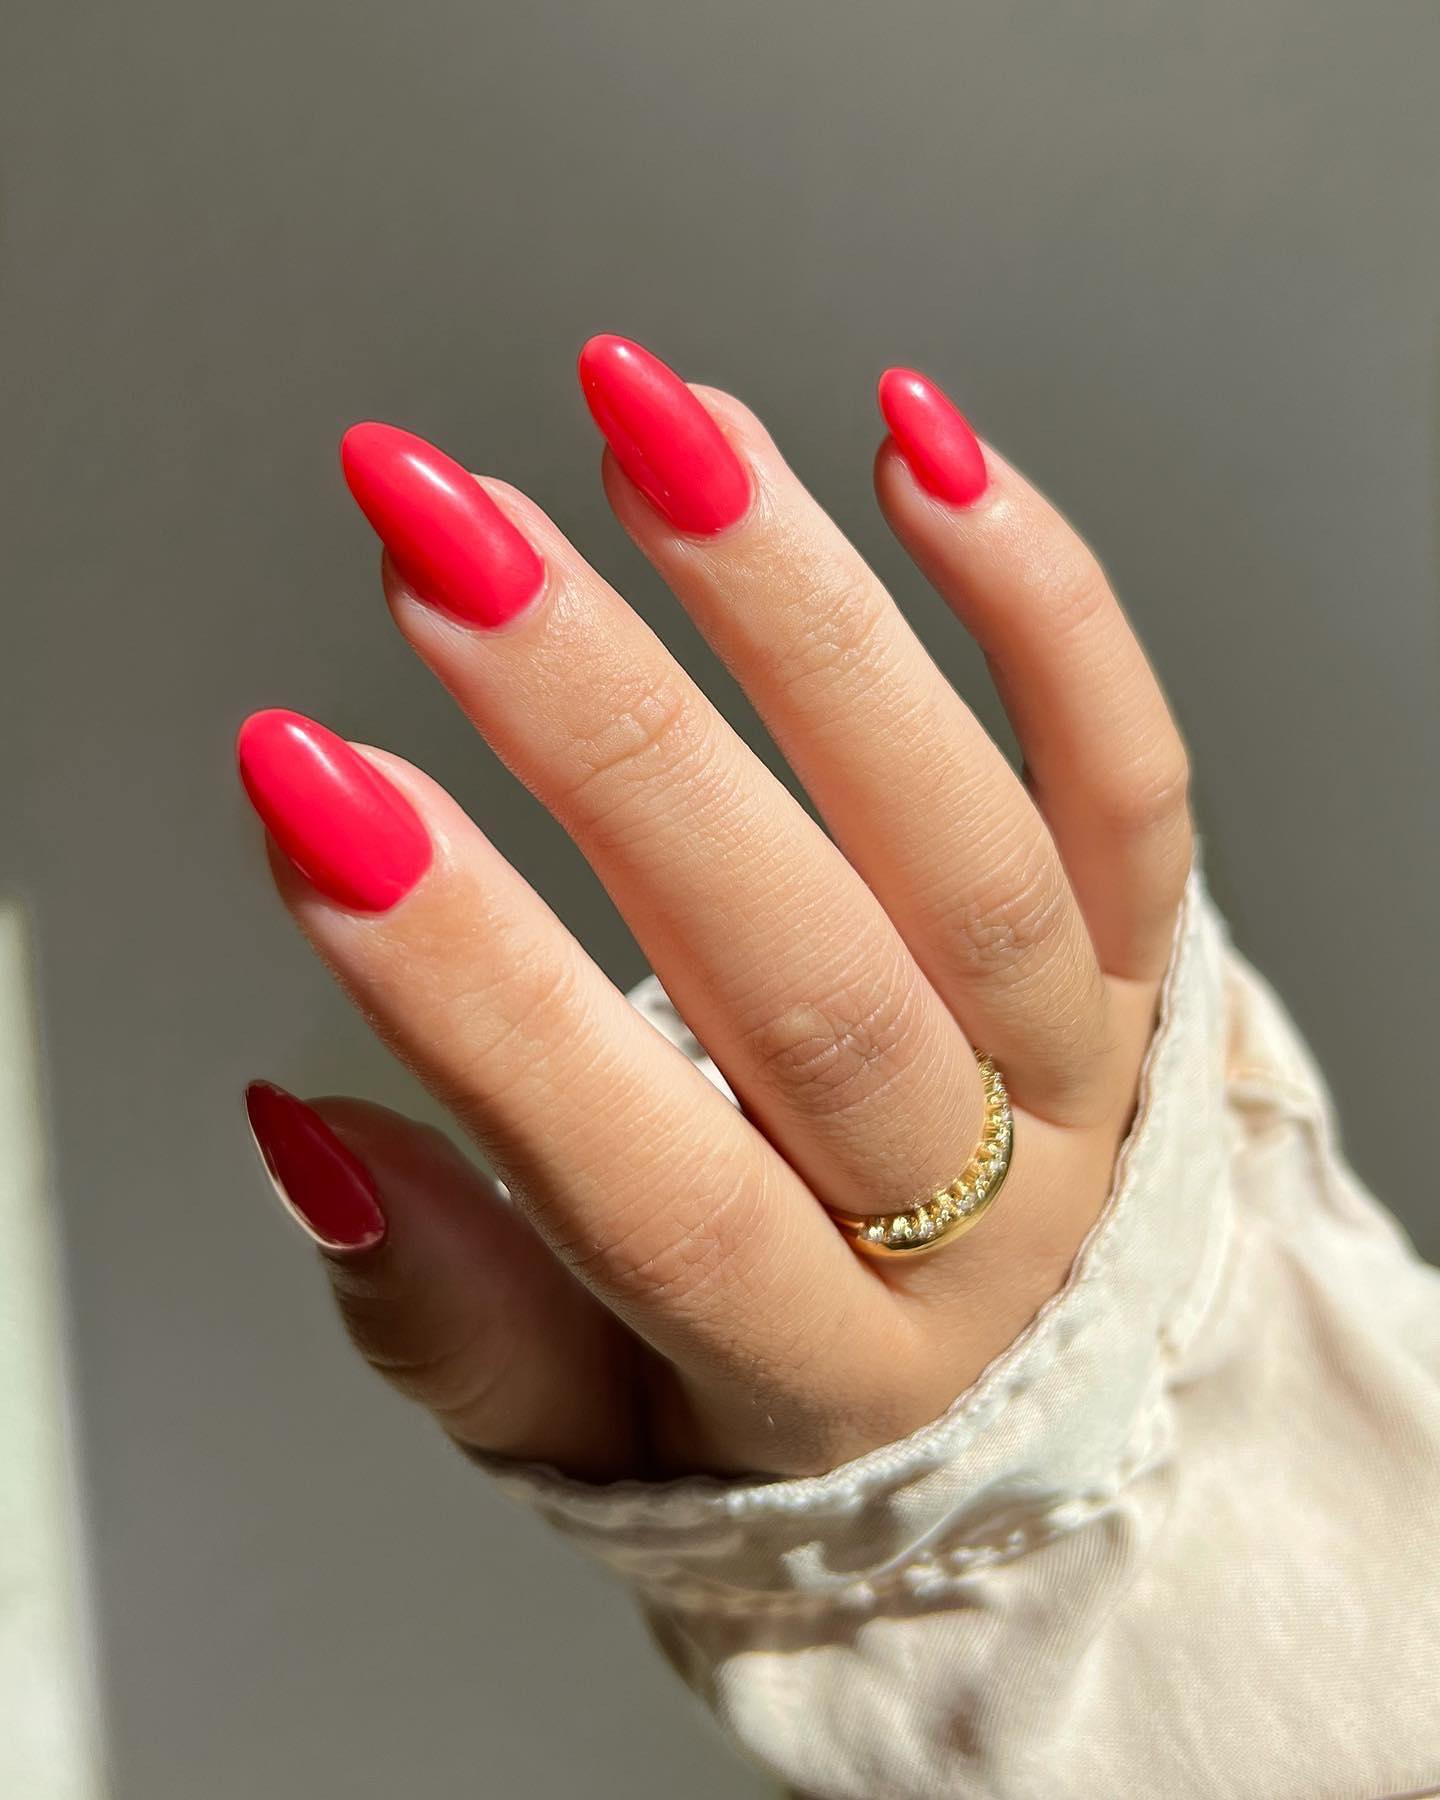 What is the first fruit that comes to your mind when we say summer? Watermelon! Let's show its nice pink color in your nais, then.